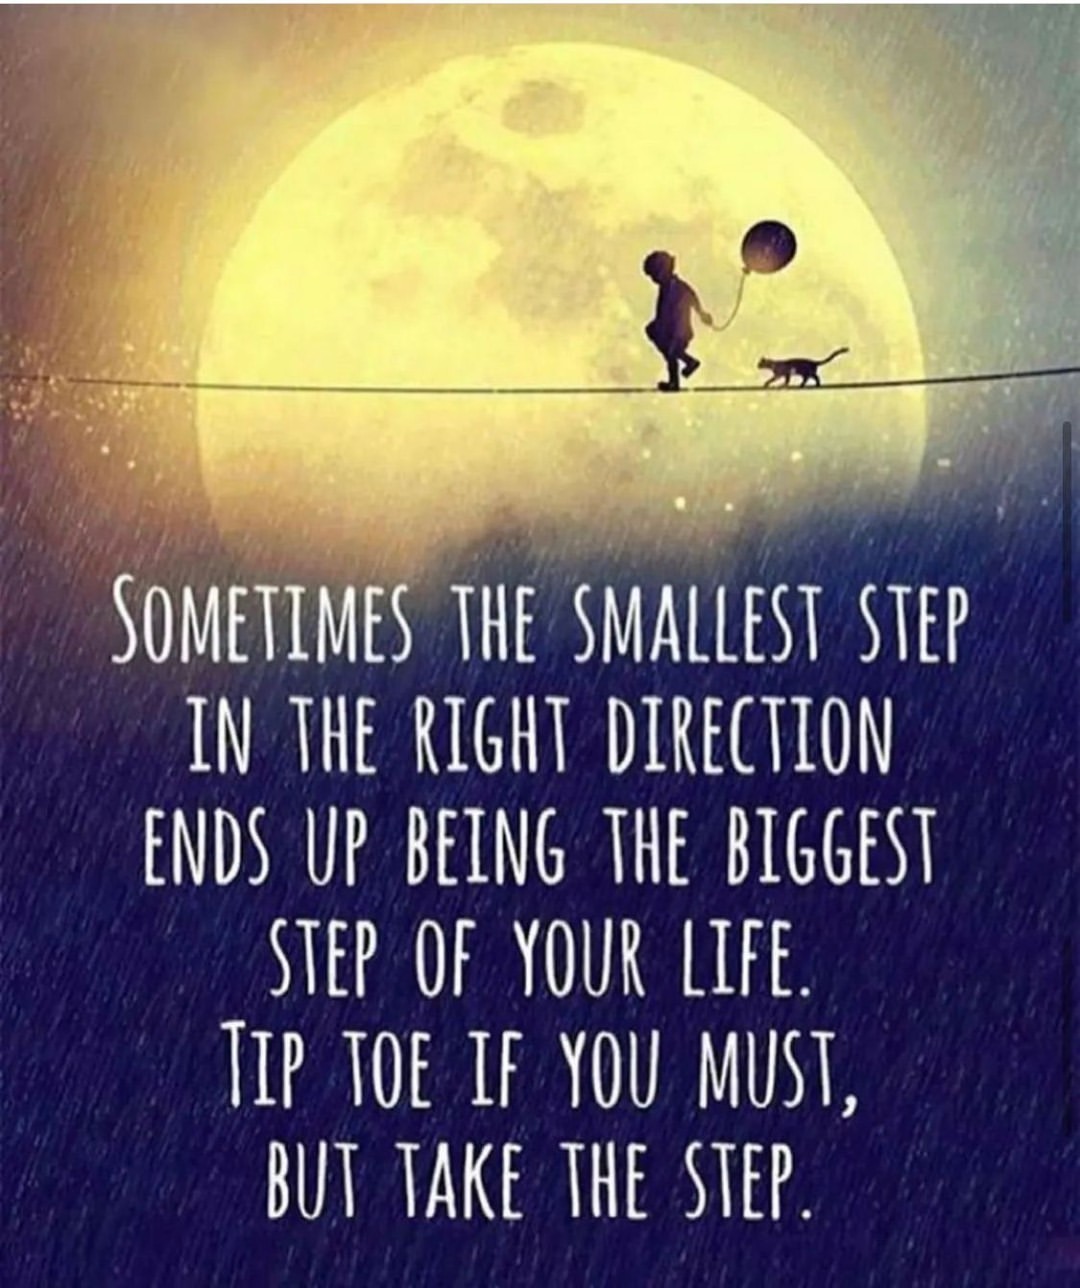 Sometimes smallest step in right direction ends up being biggest step of your life. Tip toe if you must, but take the step.